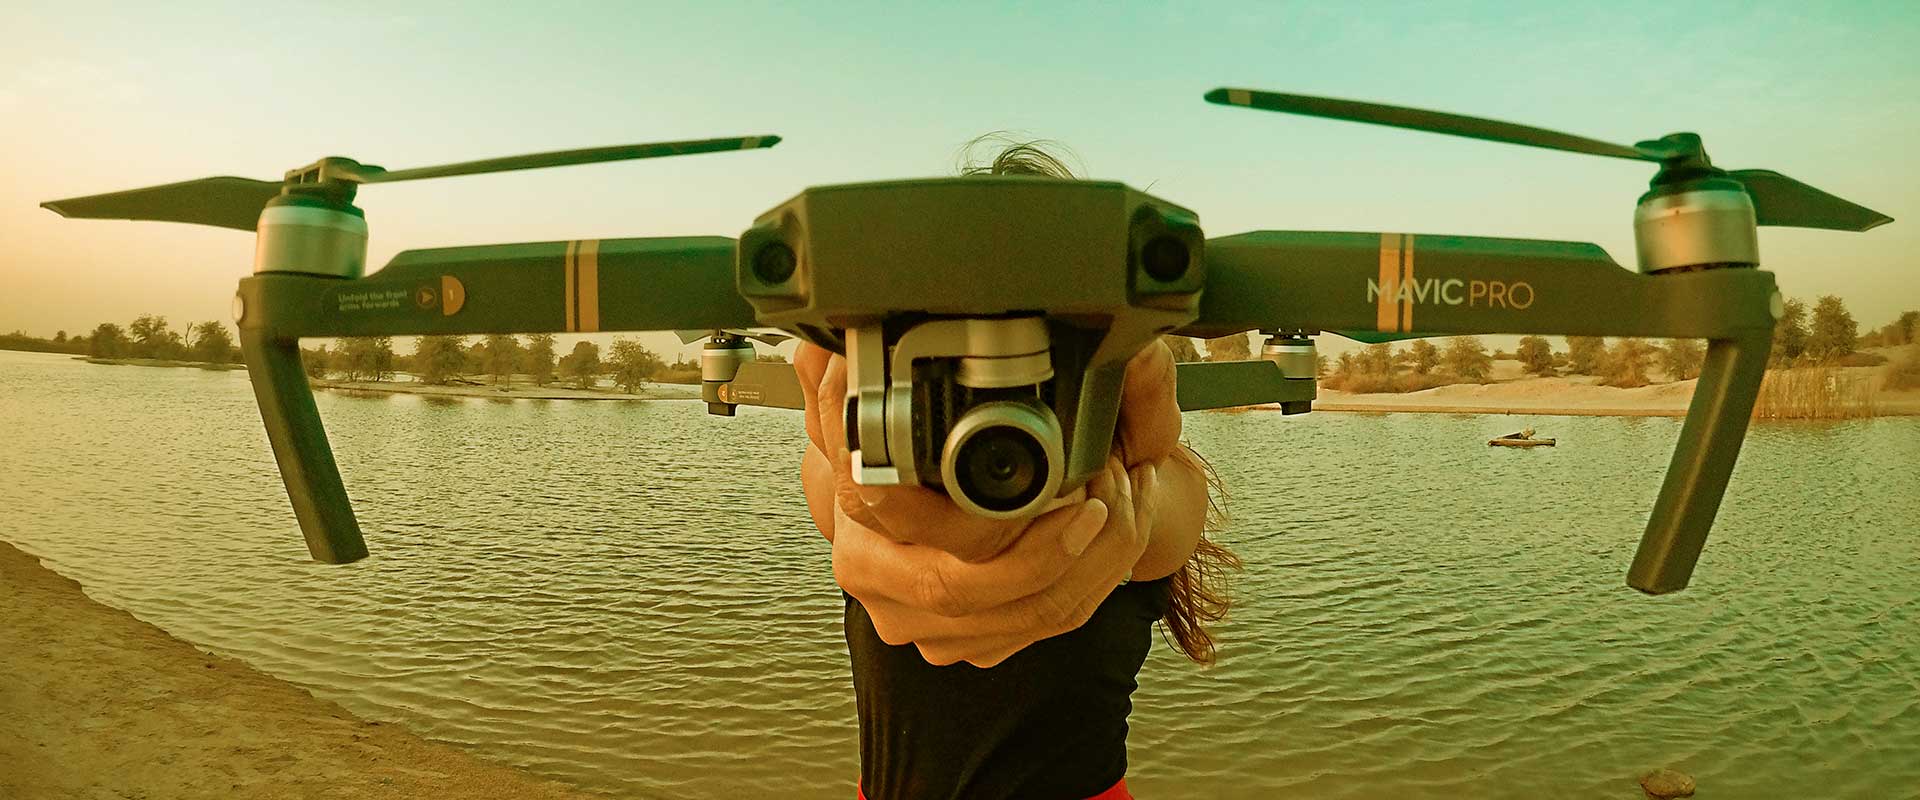 7 Amazing Facts About Drones We Want to Spread Out